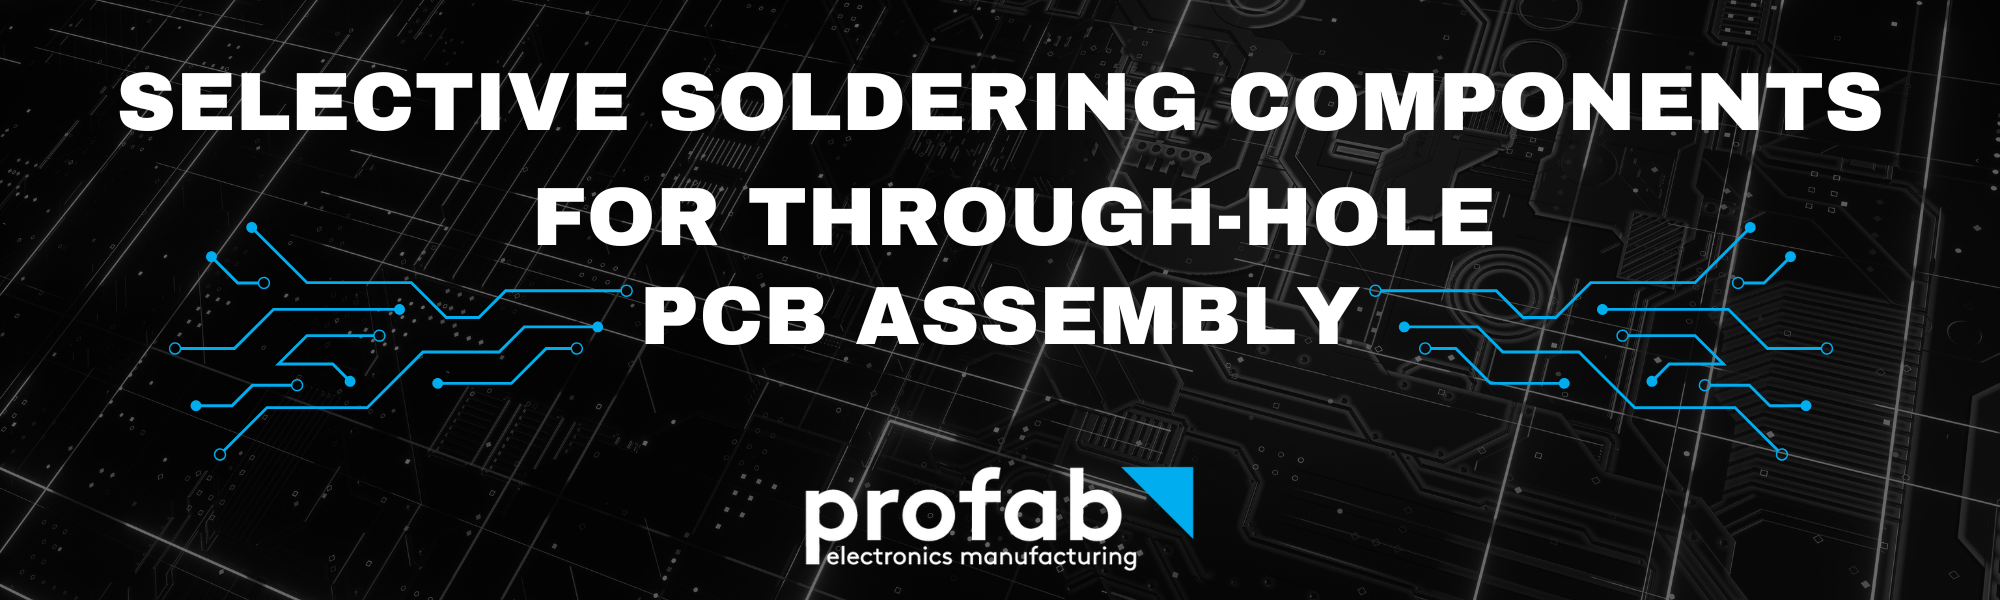 Selective Soldering Components For Through Hole PCB Assemblies